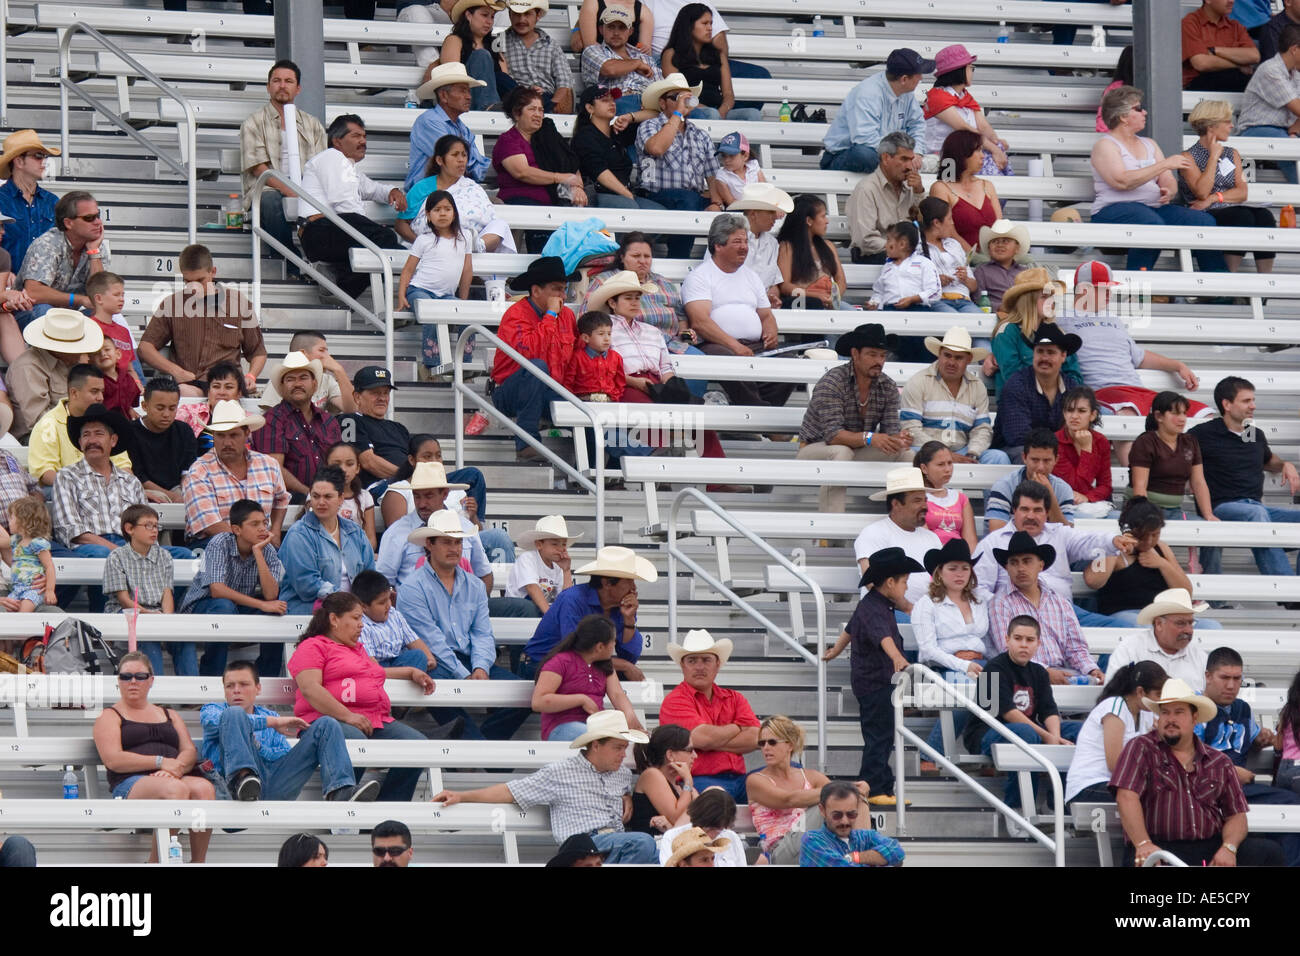 Rodeo crowd with cowboy hats sitting in the stadium bleacher seats at the California Salinas Rodeo Stock Photo